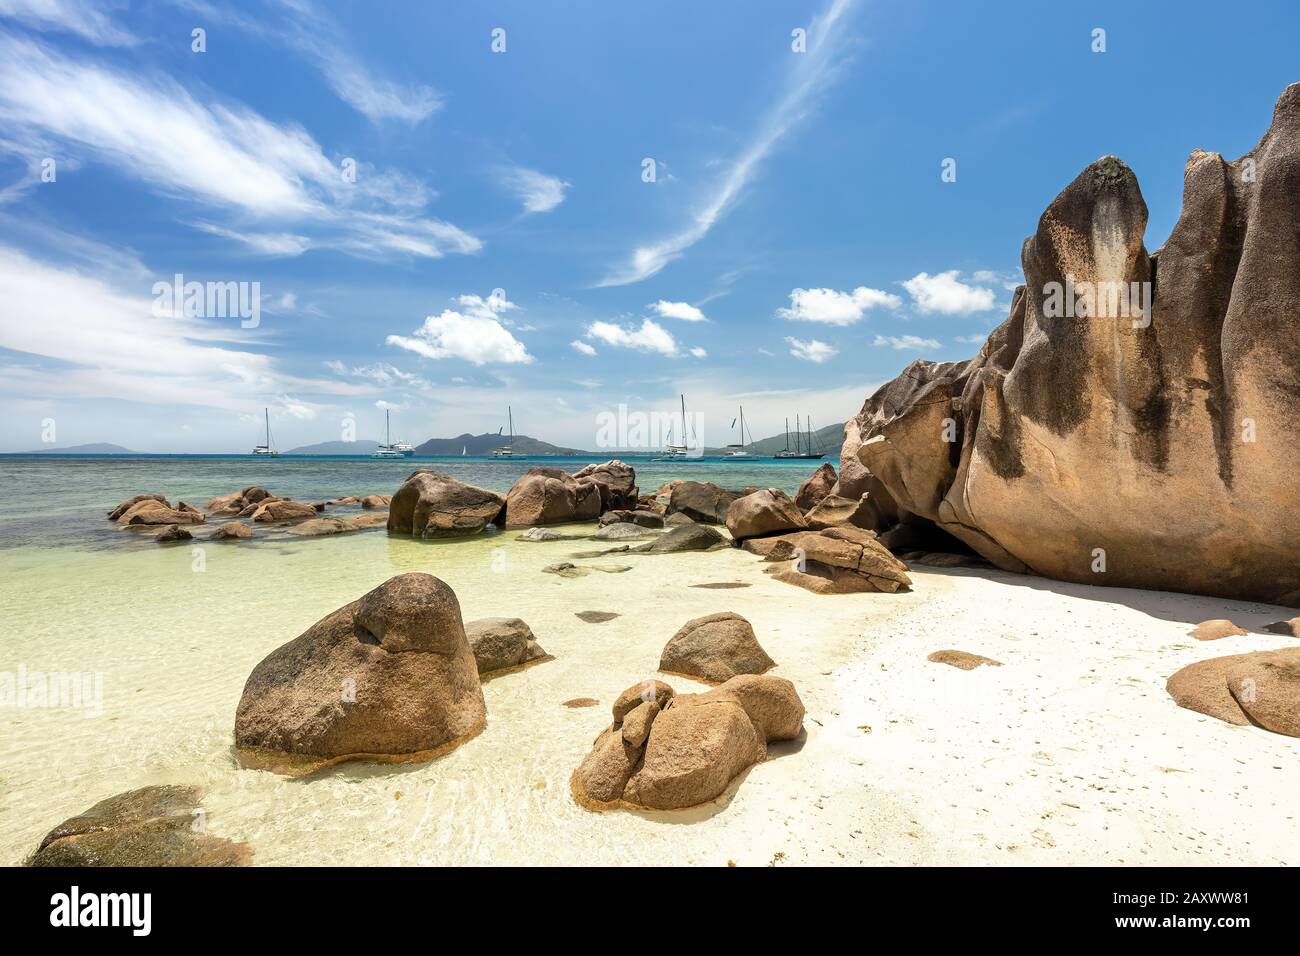 Sailing boats in Seychelles, Curieuse island, Anse St. Jose beach Stock Photo